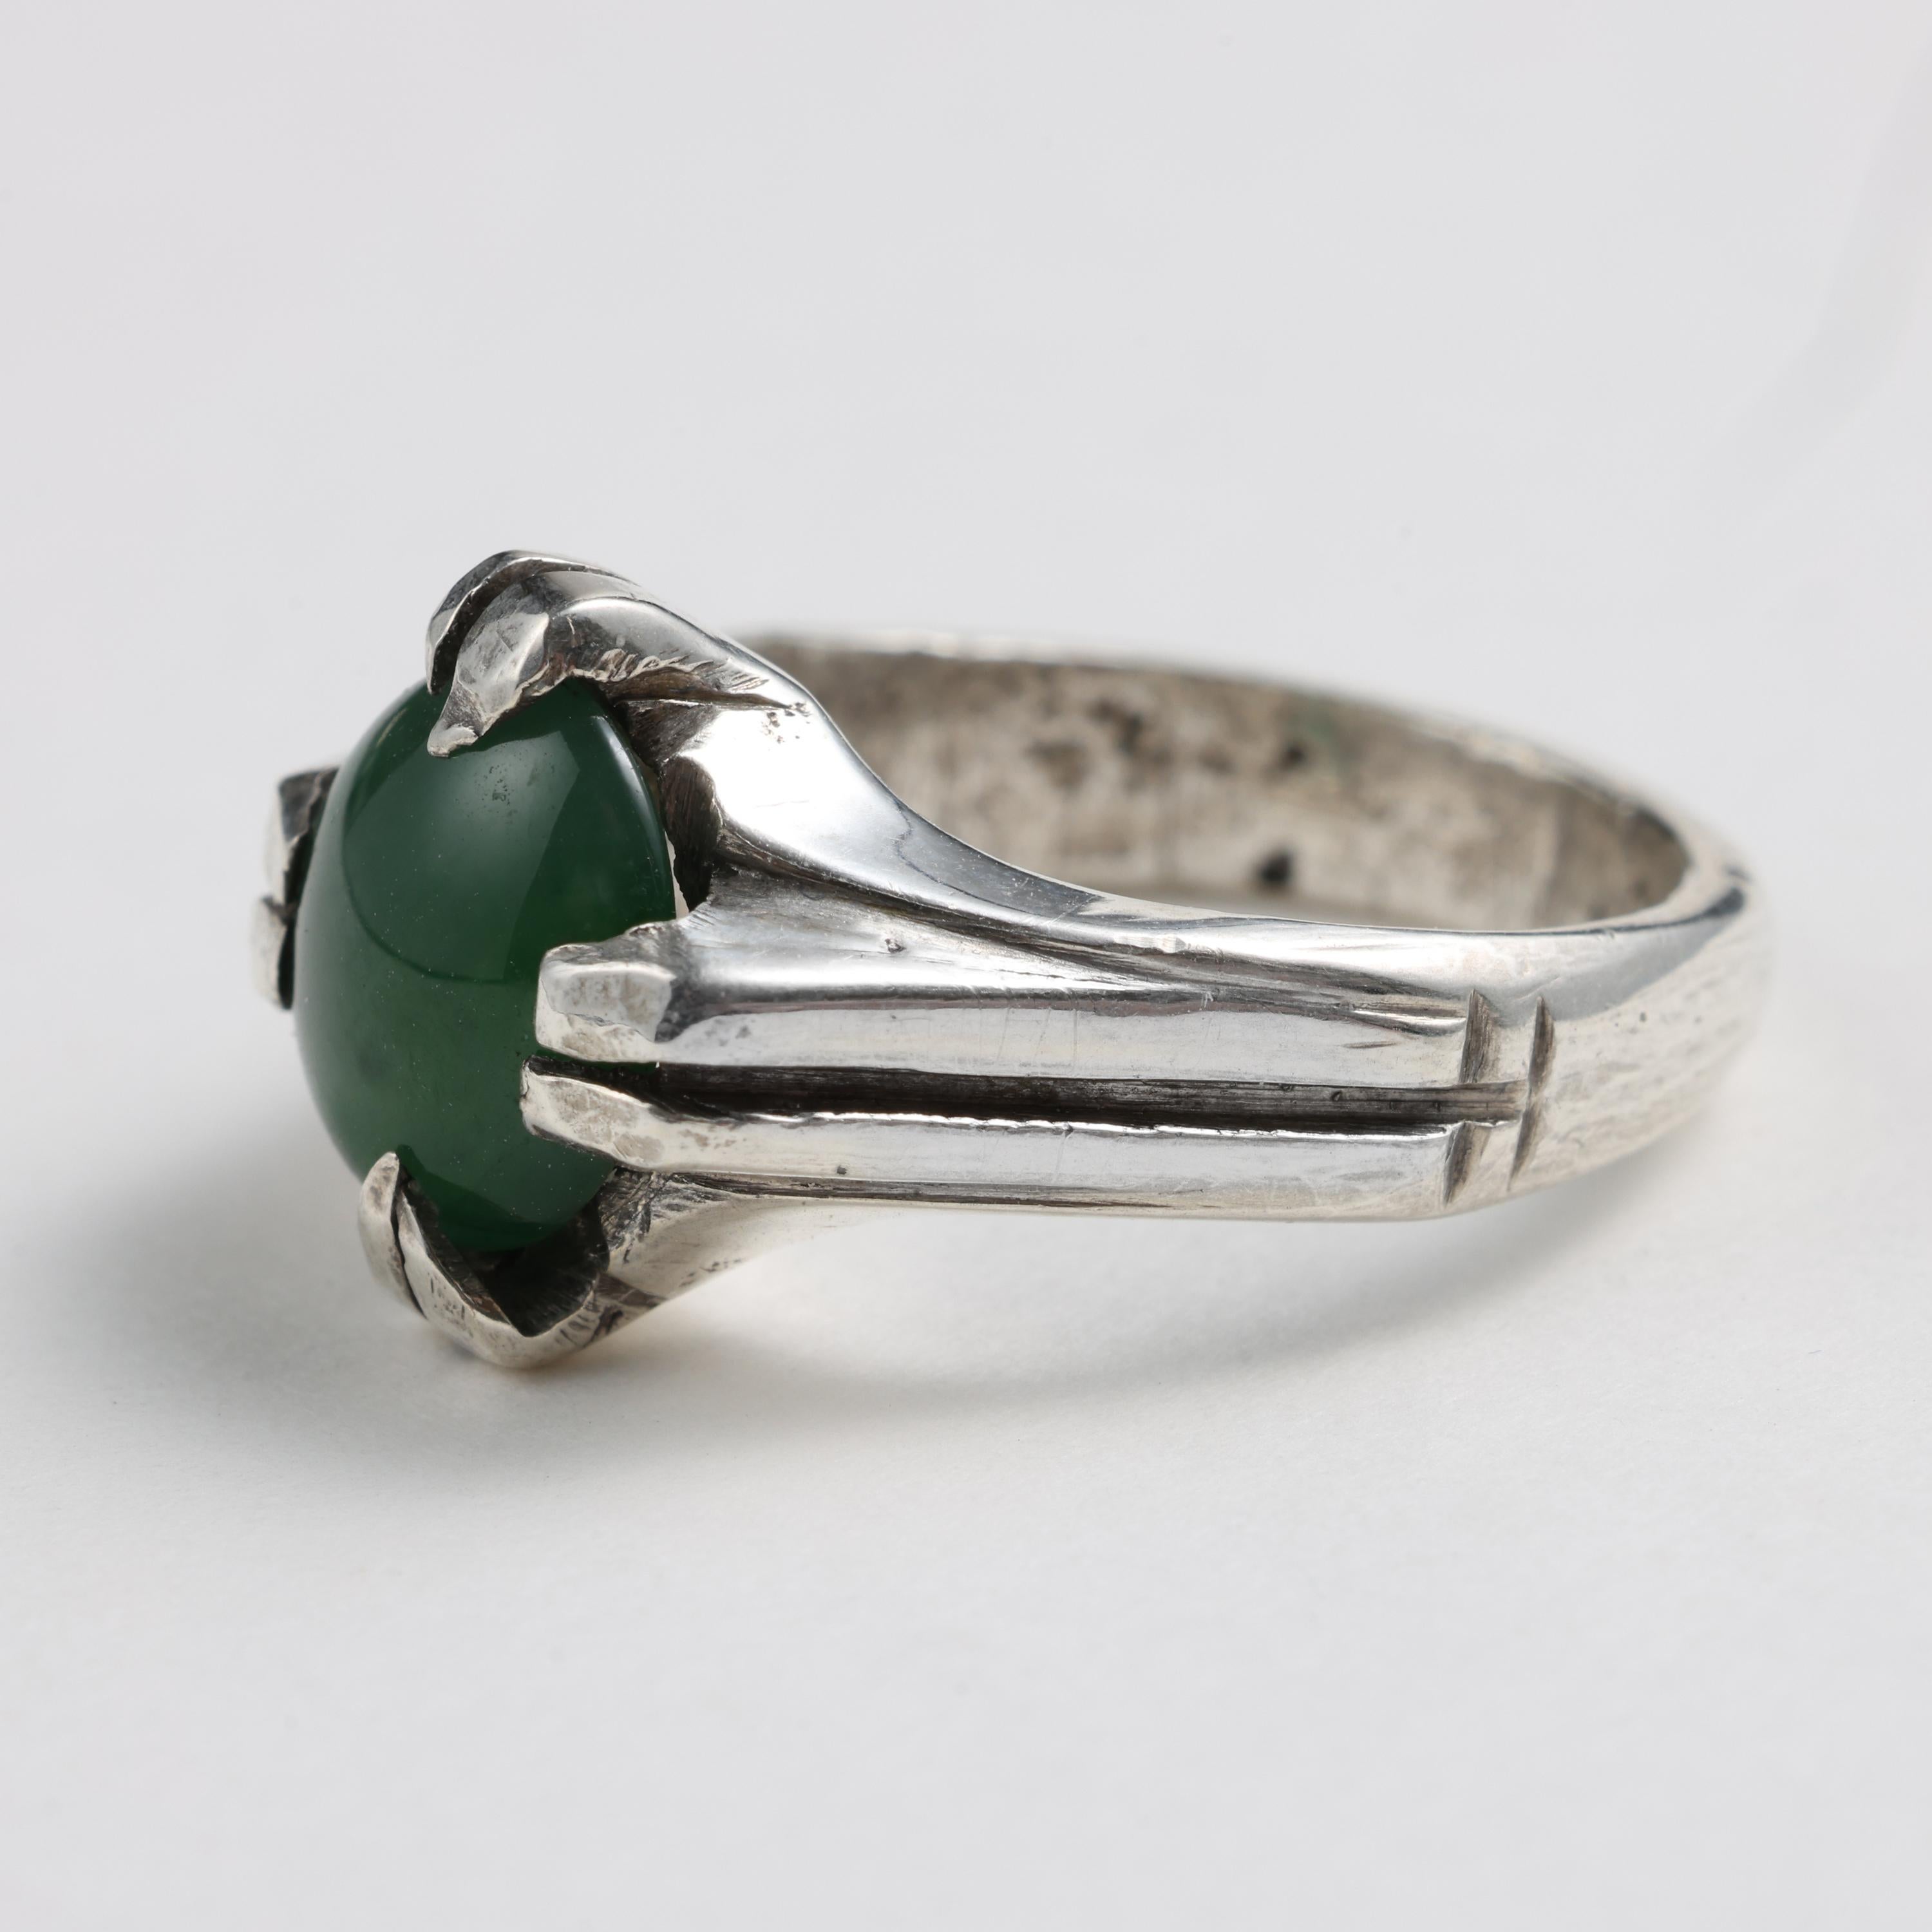 Cabochon Omphacite Jade Ring in Silver, Certified Untreated Fei Cui